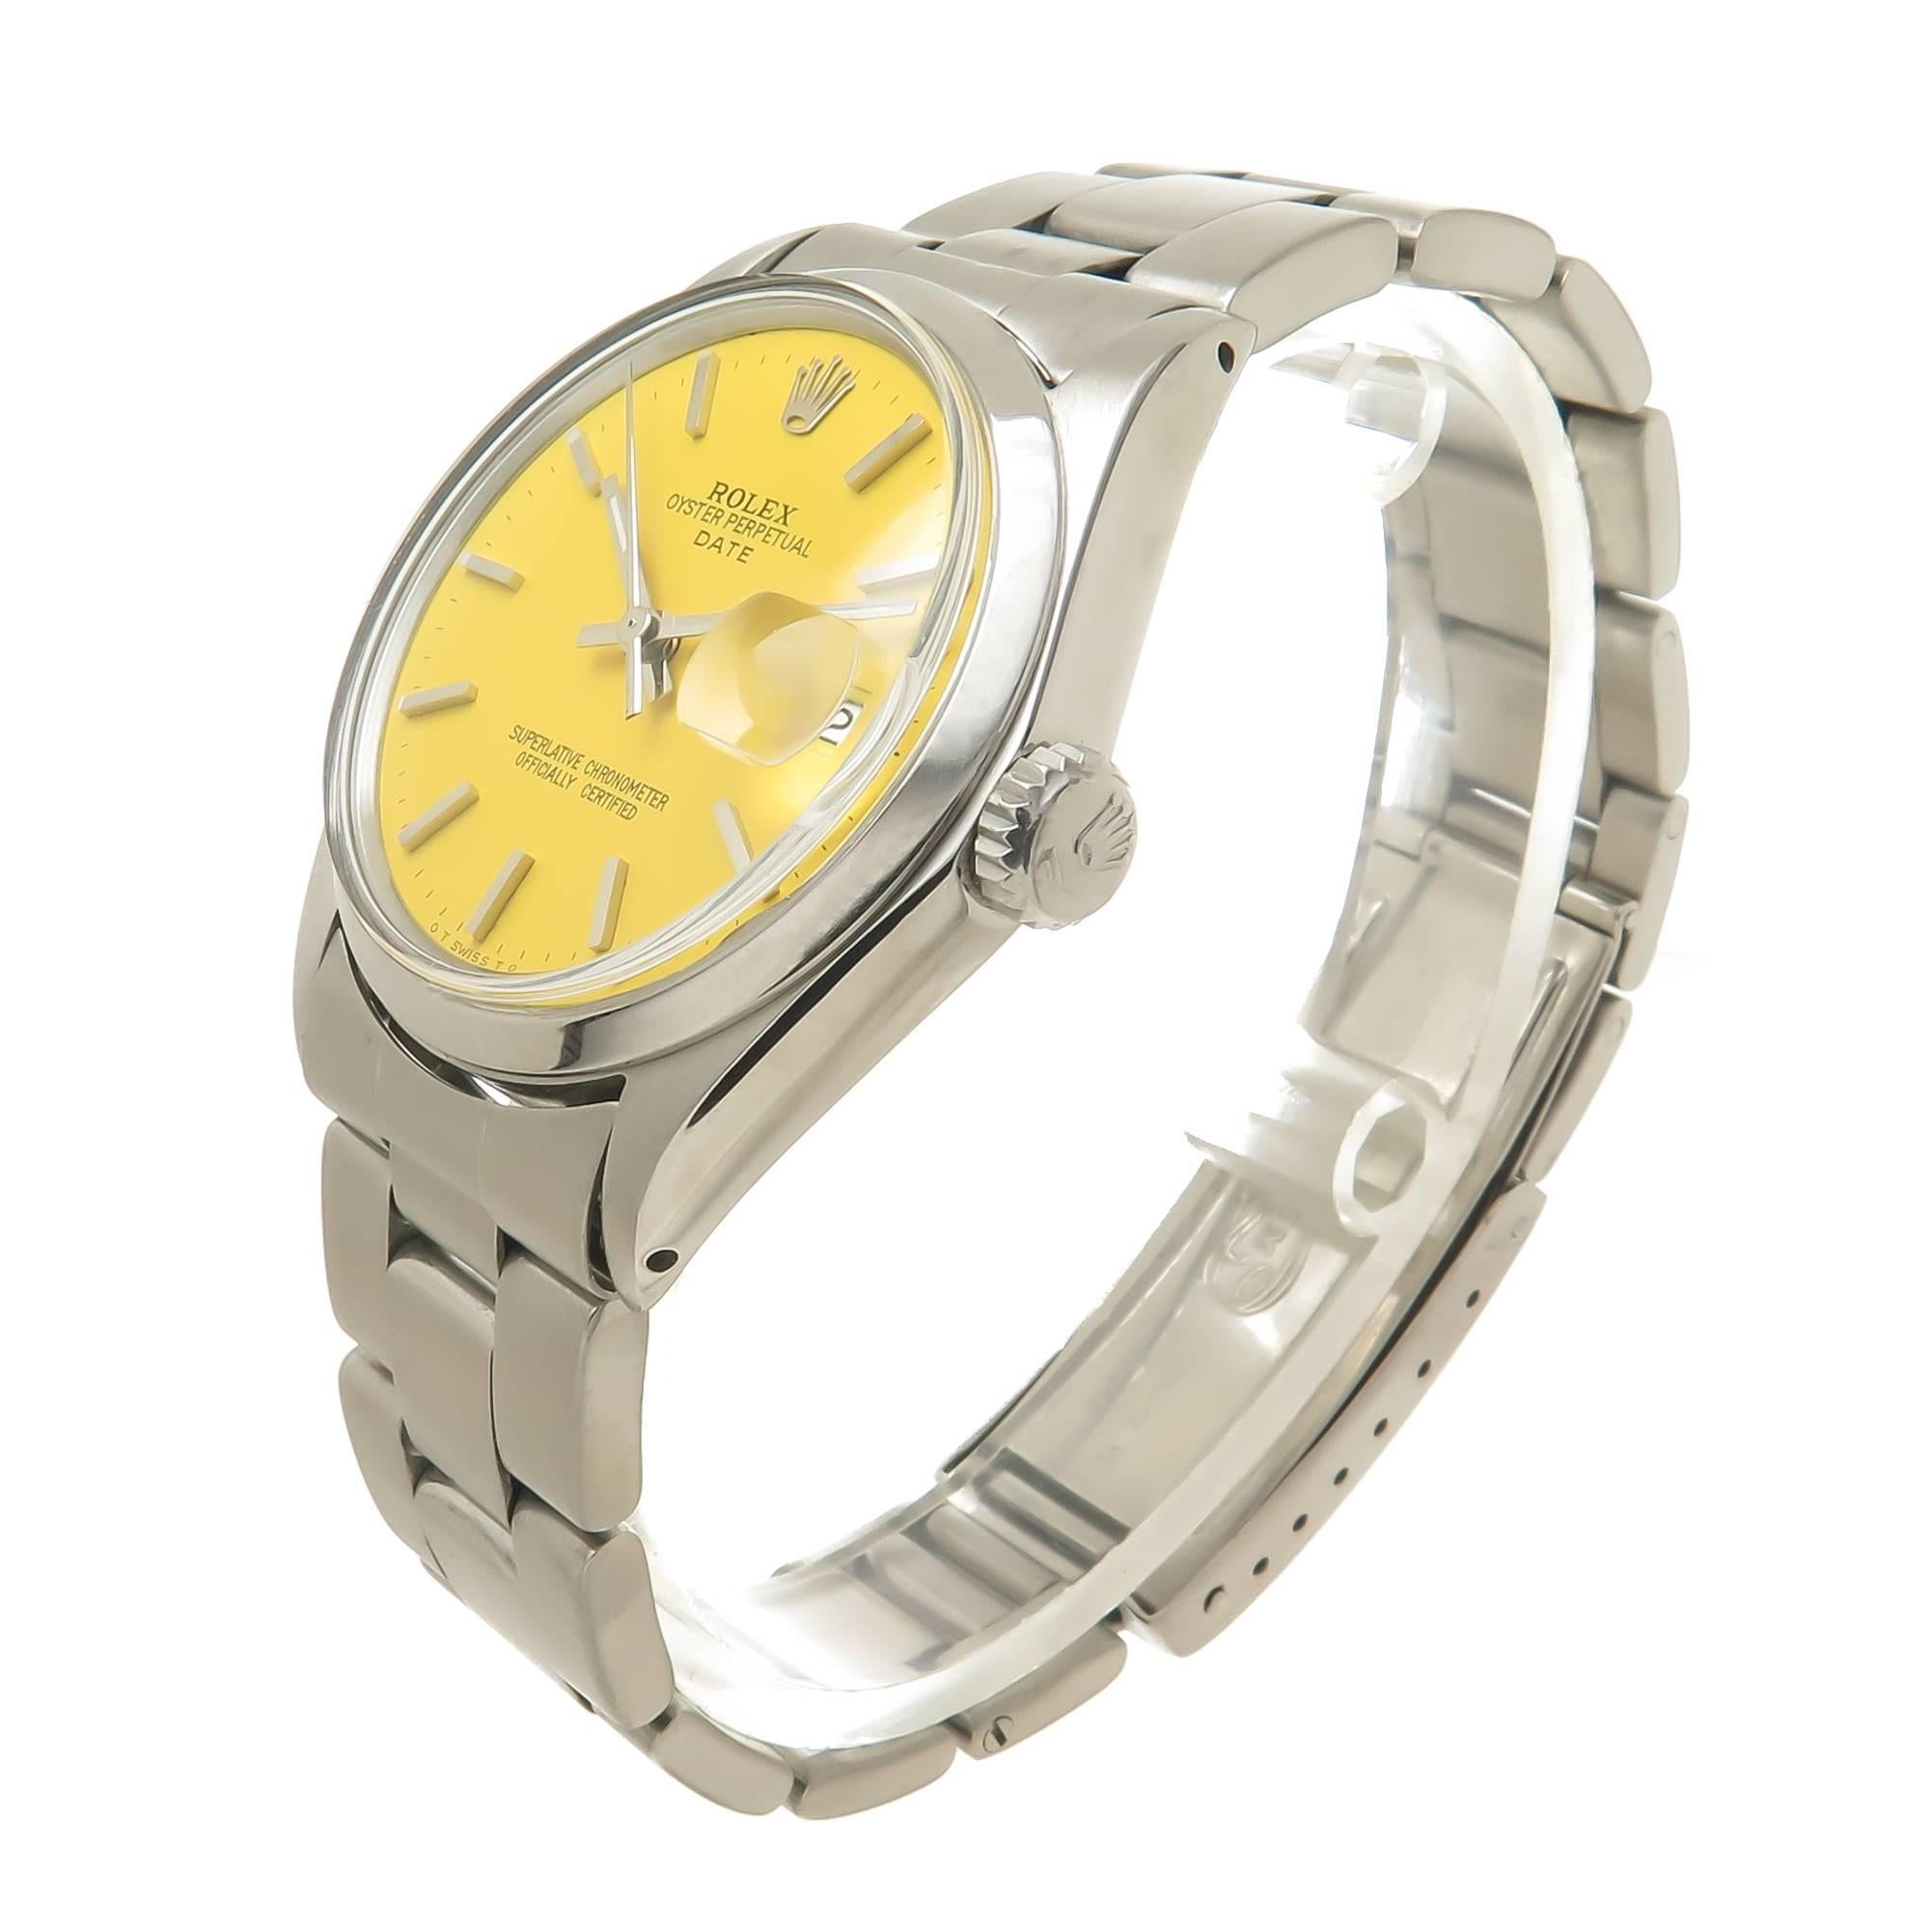 Circa 1968 Rolex reference 1500  "Date" model Wrist Watch, 34 MM Stainless Steel Water Resistant Case with smooth Bezel. Caliber 1570 Automatic, self winding Movement. Custom Yellow Dial with Raised Markers, sweep seconds hand, calendar